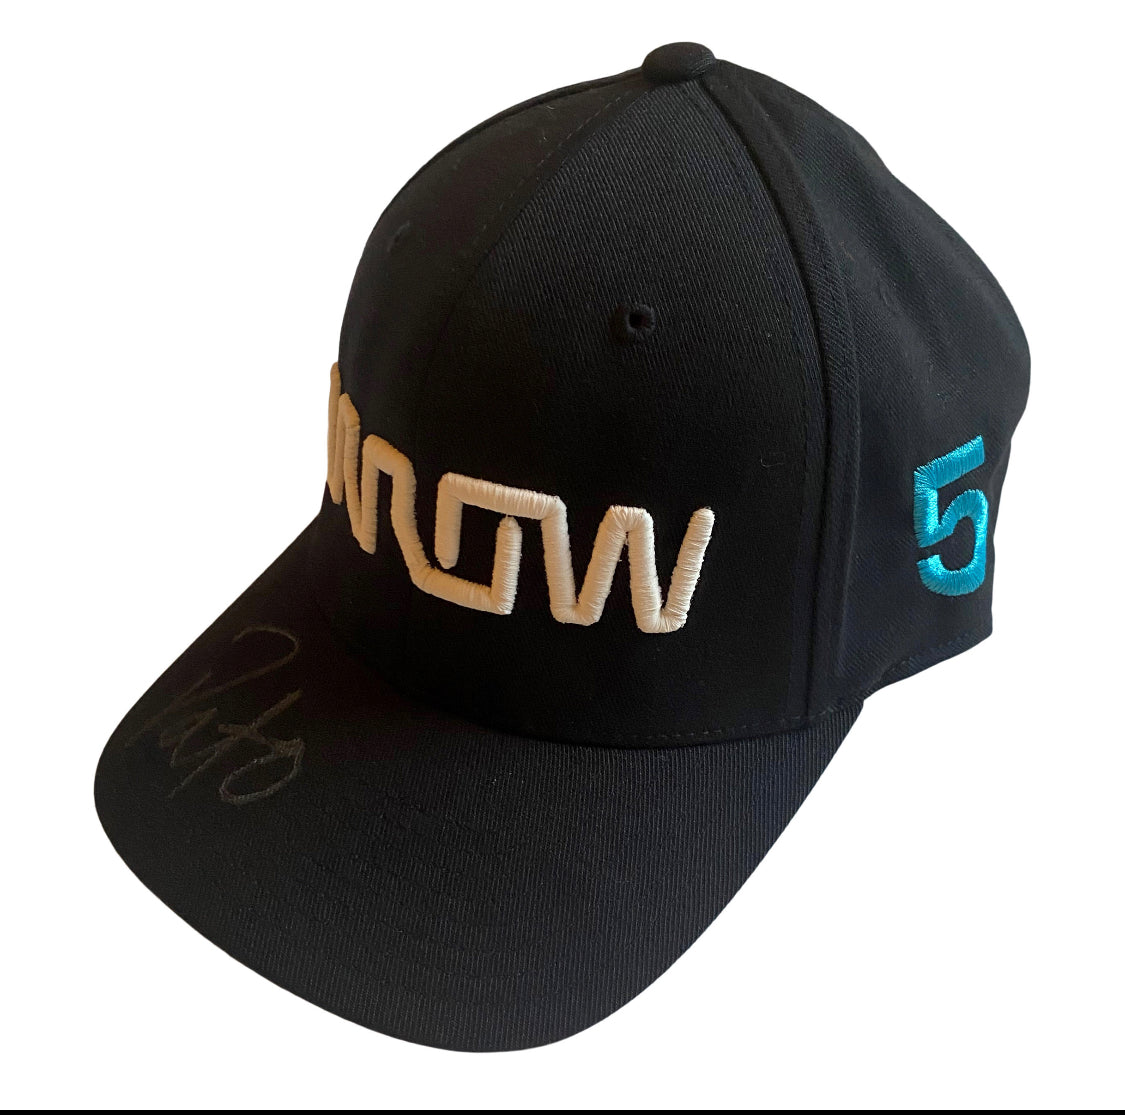 *Autographed* Black Curved Bill Cap with ARROW logo in front and Neon PO logo on side